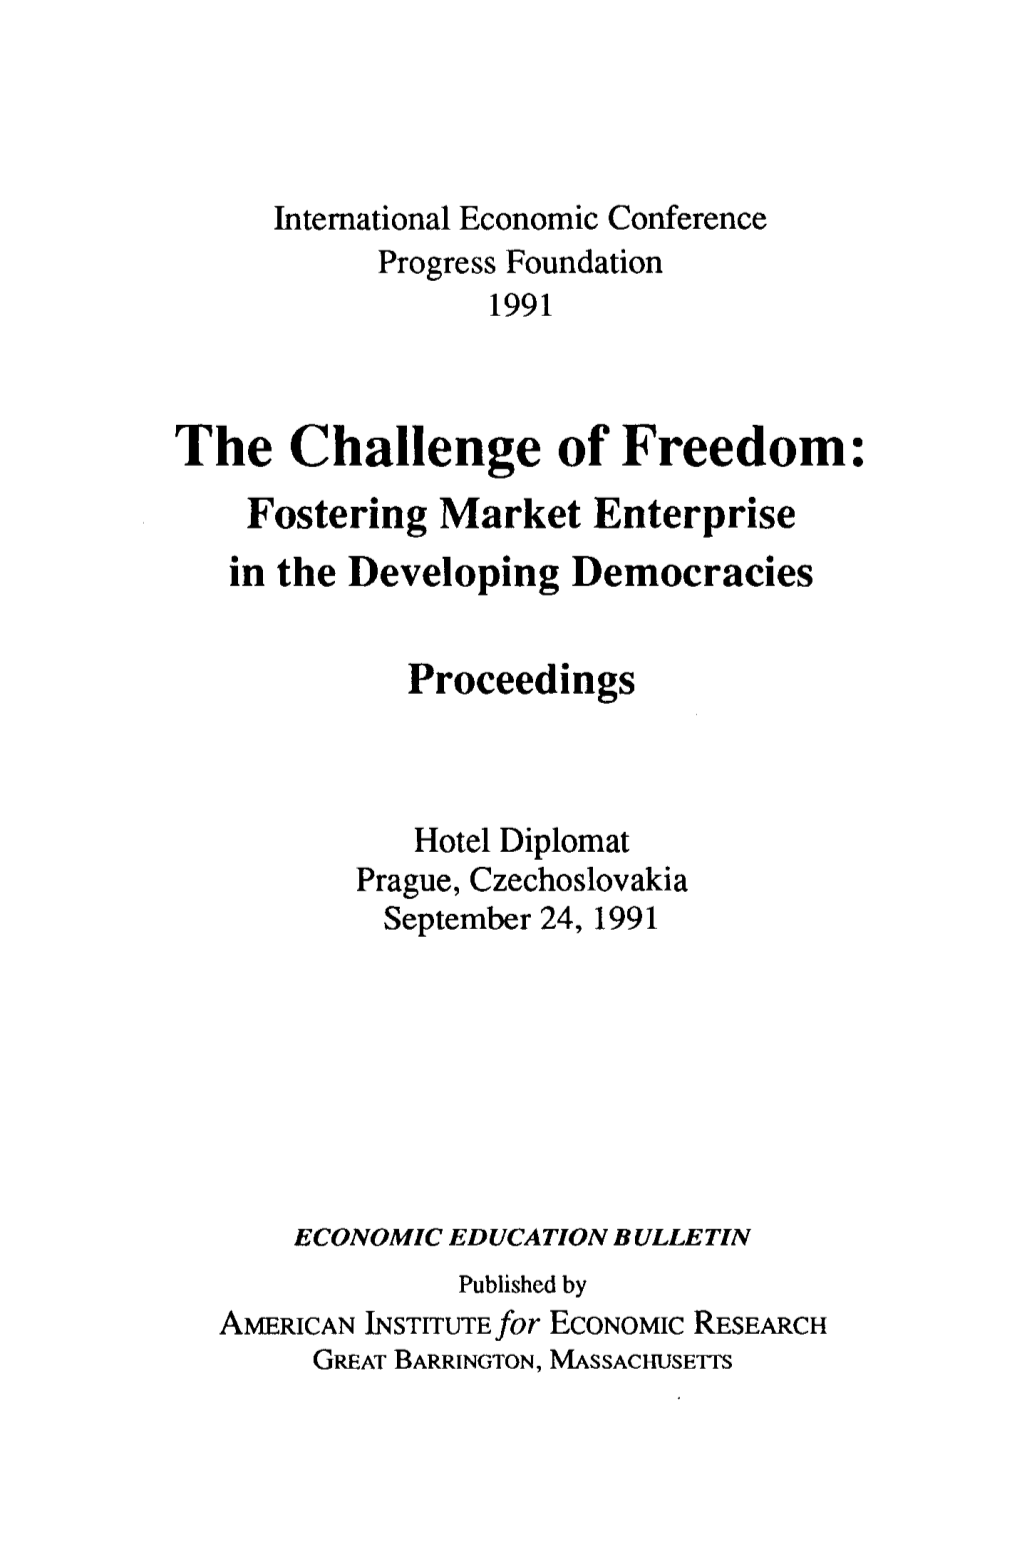 The Challenge of Freedom: Fostering Market Enterprise in the Developing Democracies